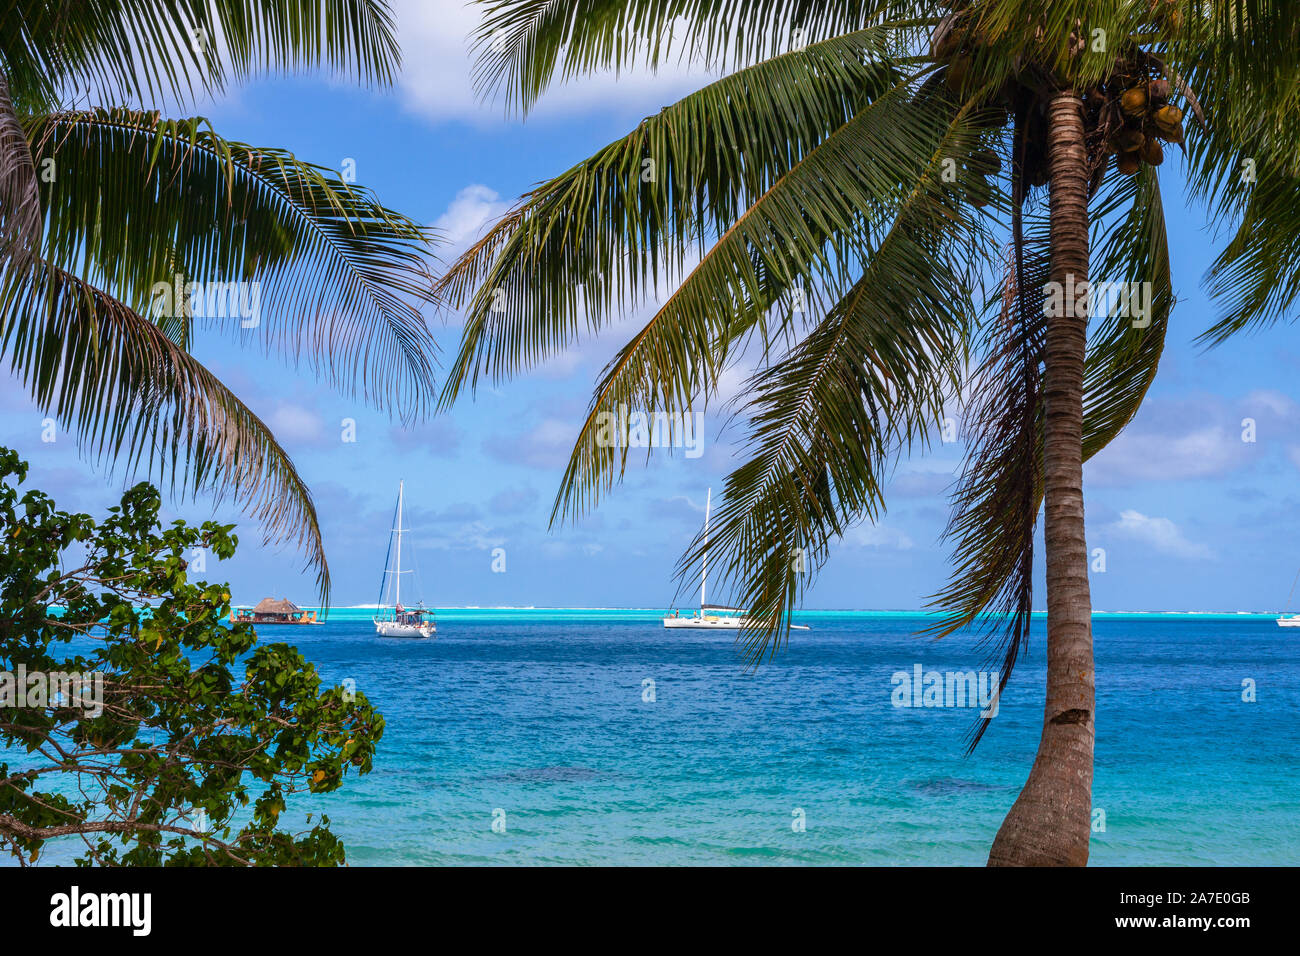 A view of the bay through palm trees,Huahine, French Polynesia Stock Photo